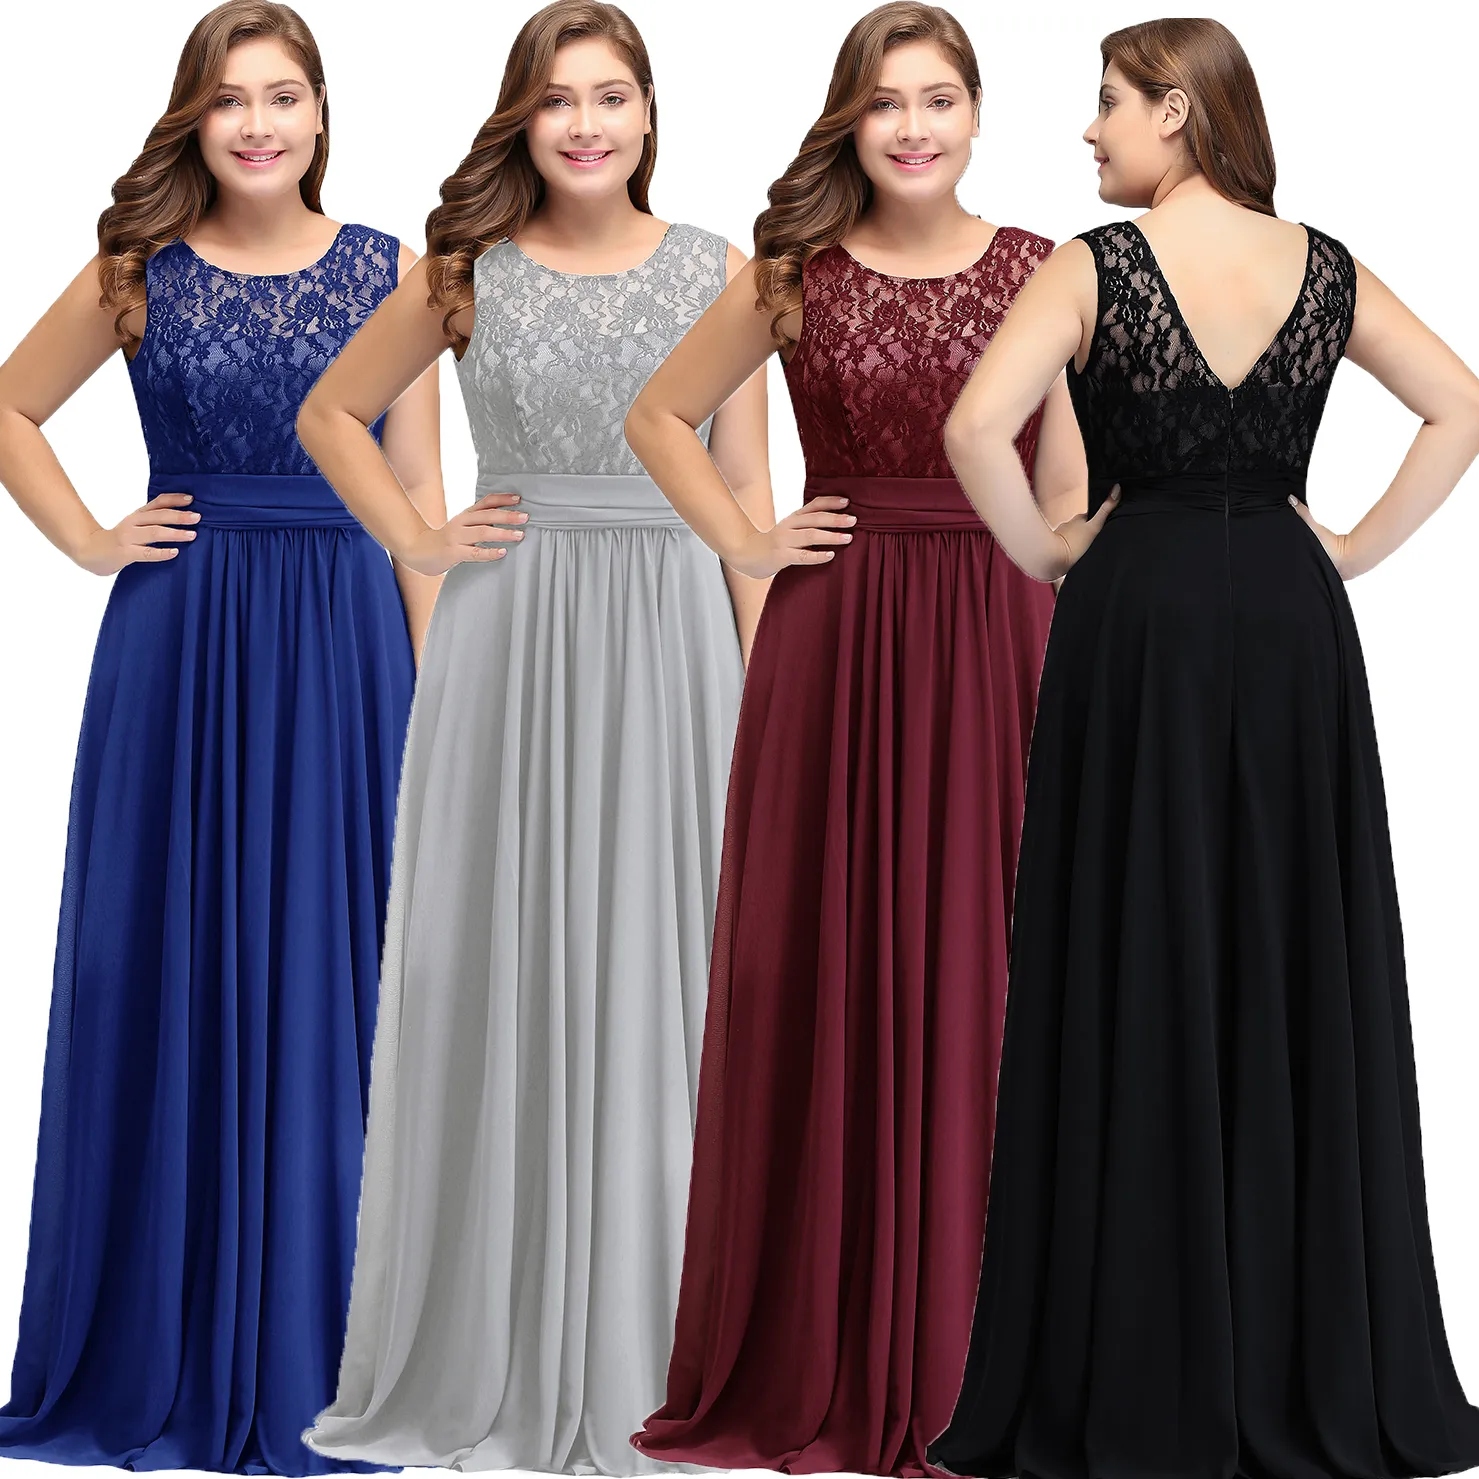 New Simple Modest Dark Navy Chiffon Bridesmaid Dresses Plus Size 2018 Cheap Scoop Sleeveless A Line Formal Wedding Guests Party Wear CPS526